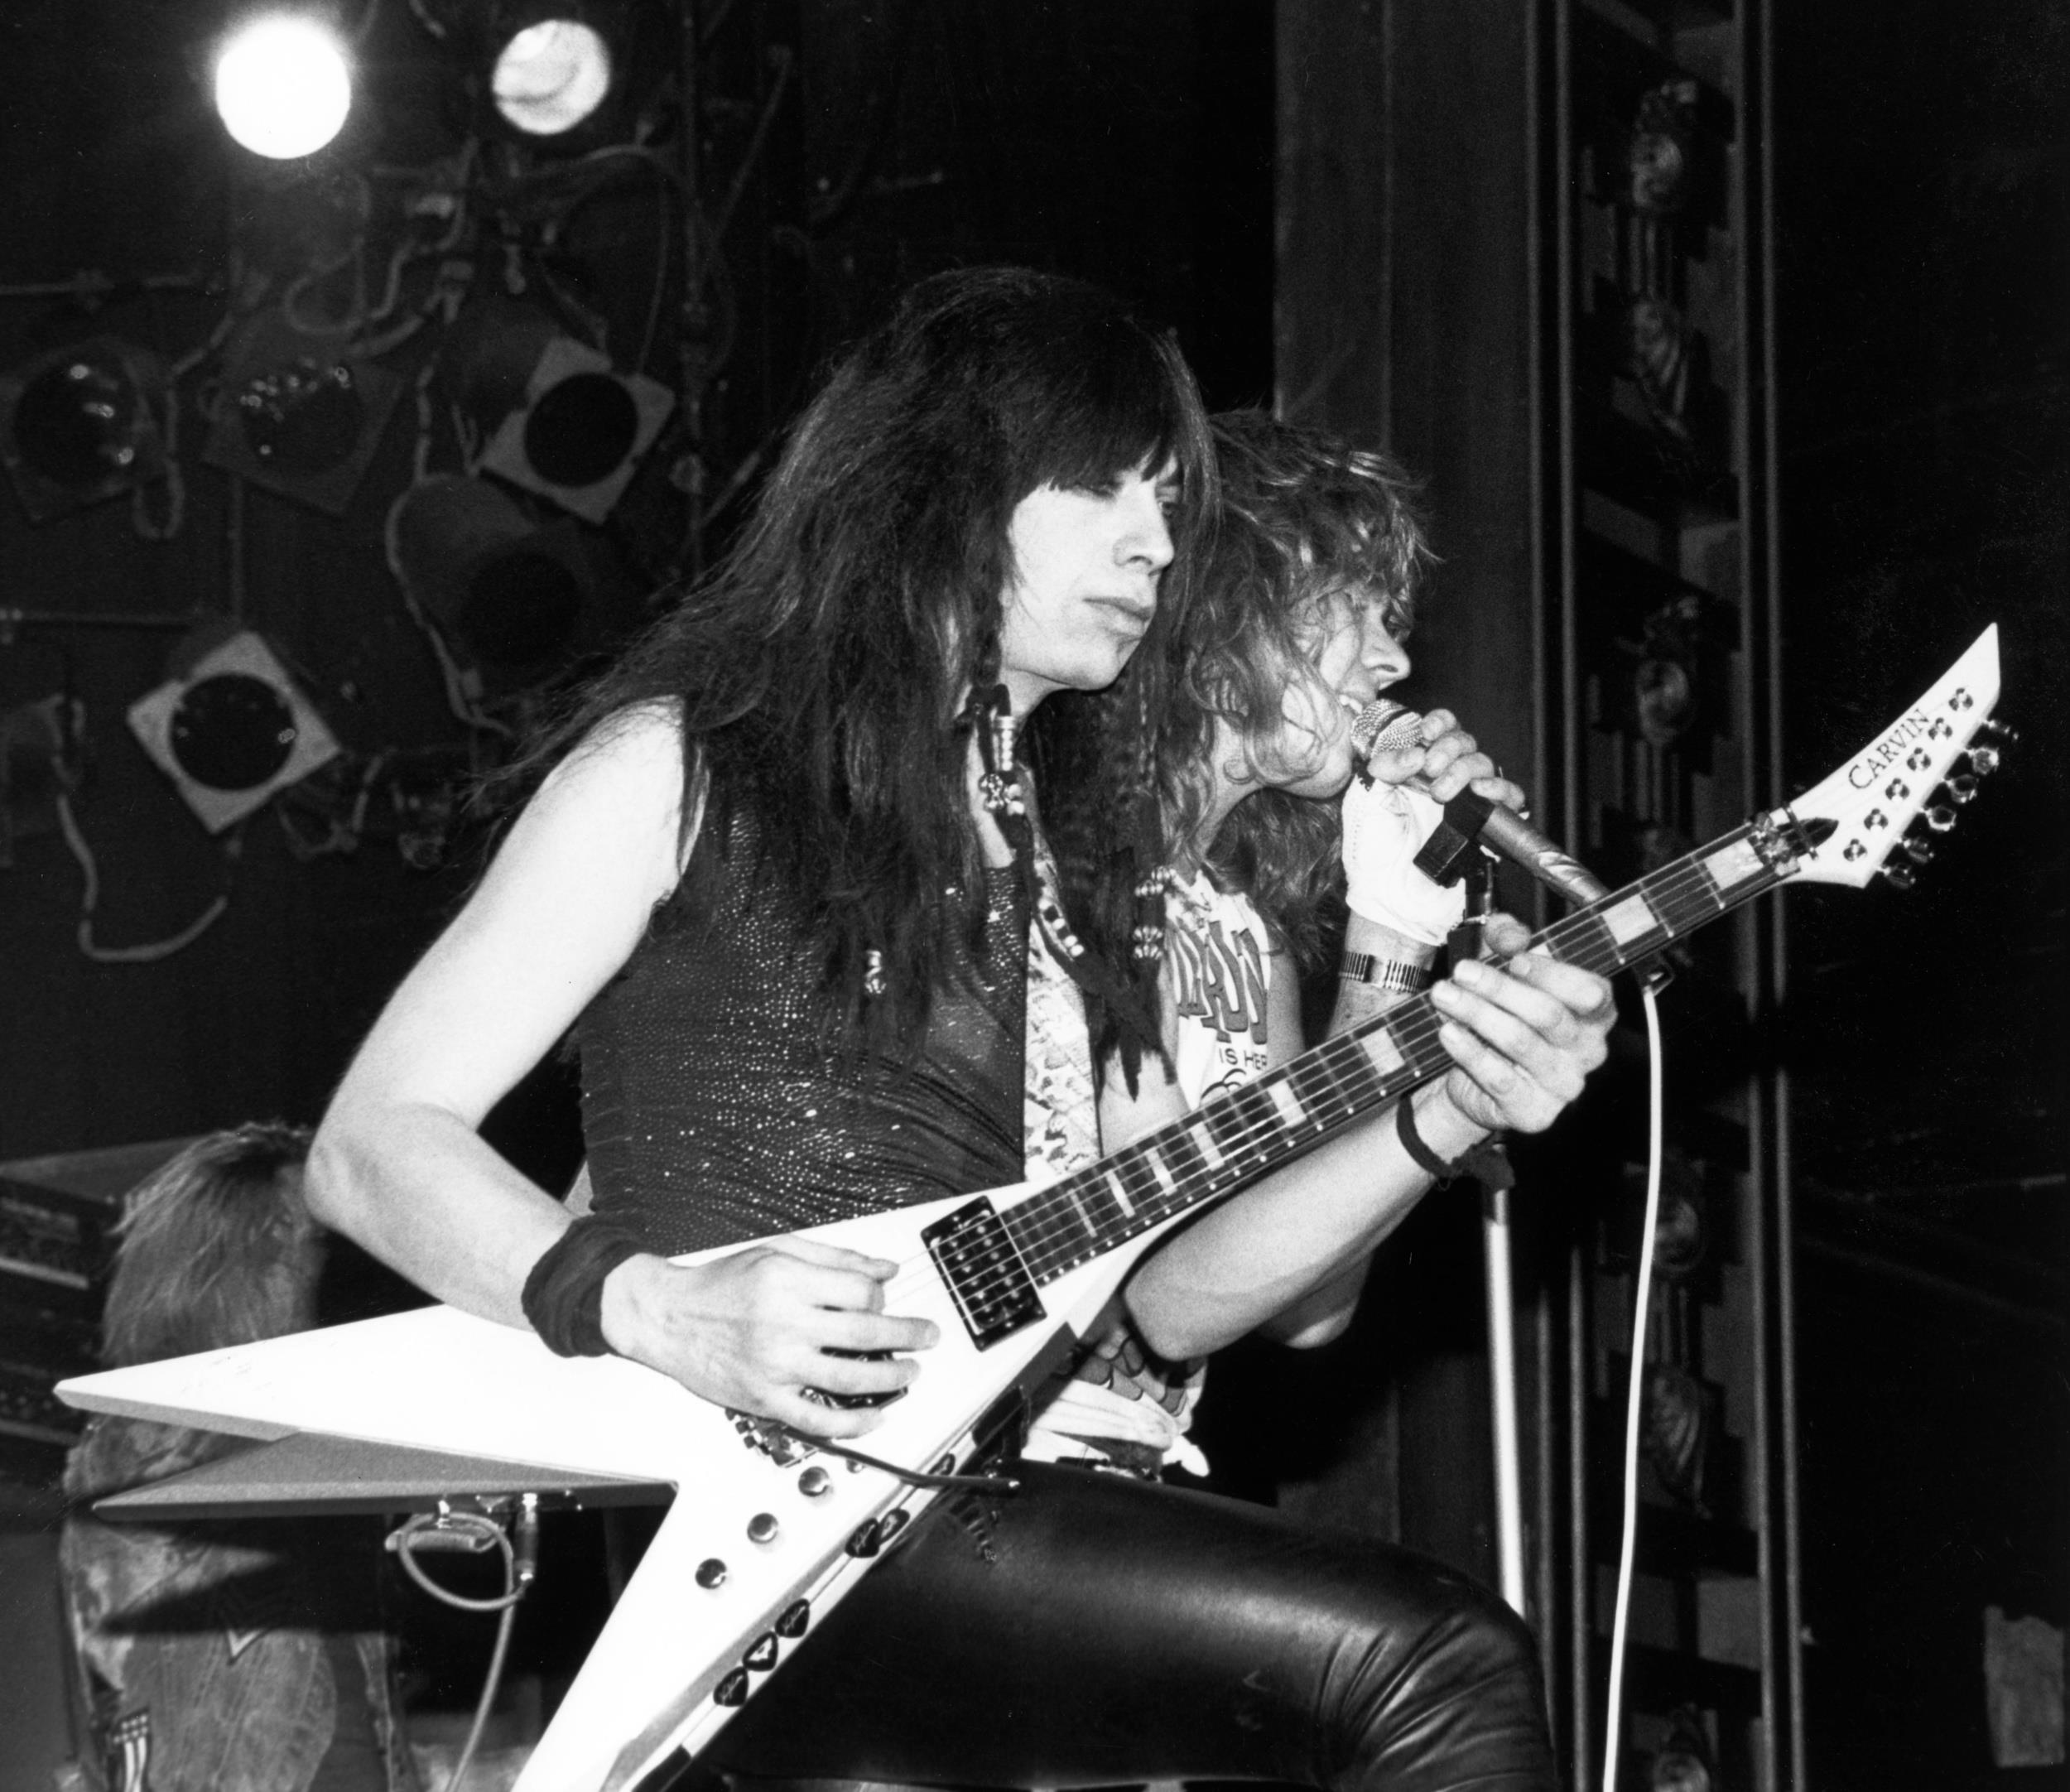 <p>Before Mark Slaughter had his 15 or 20 minutes with his own band, he fronted one of the more underrated hair metal groups founded by former Kiss guitarist Vinnie Vincent. VVI released just two albums, its self-titled 1986 project featuring one-time Journey frontman Robert Fleischman on vocals and 1988's <em>All Systems Go</em> with Slaughter at the mic. It was the latter that garnered mainstream attention thanks to the combination of Slaughter's unique voice and Vincent's solid guitar work on tracks like "Love Kills" and<a href="https://www.youtube.com/watch?v=WlaFvFk501Y&list=RDWlaFvFk501Y&start_radio=1" rel="noopener noreferrer"> "That Time of Year."</a></p><p>You may also like: <a href='https://www.yardbarker.com/entertainment/articles/20_facts_you_might_not_know_about_john_wick_020924/s1__37079429'>20 facts you might not know about 'John Wick'</a></p>